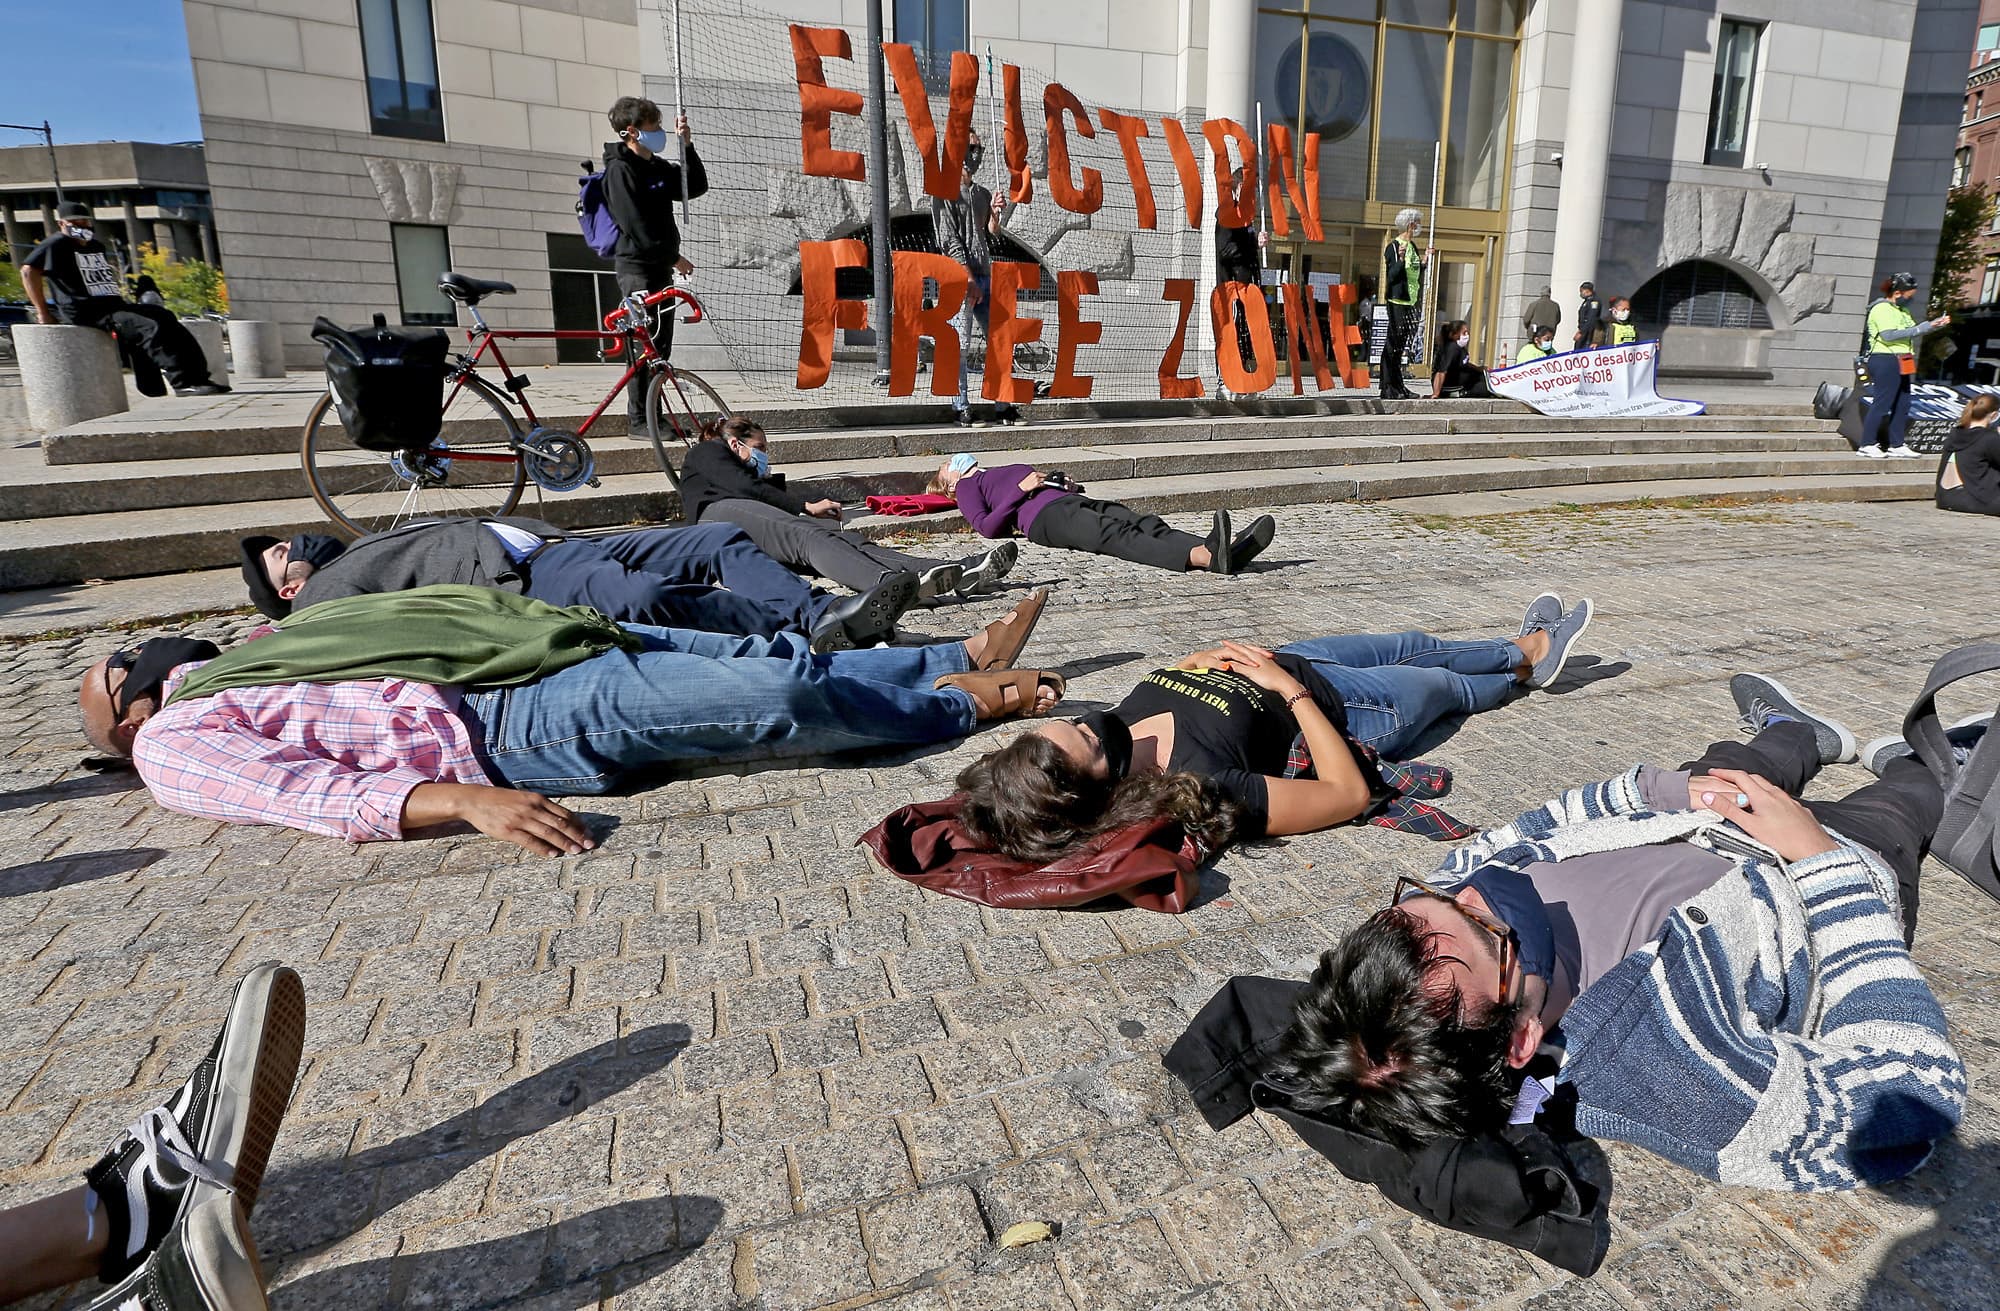 Protesters lay down during a rally to prevent Massachusetts evictions in front of Boston Housing Court on Oct. 15, 2020 in Boston, Massachusetts. (Matt Stone/ MediaNews Group/Boston Herald)